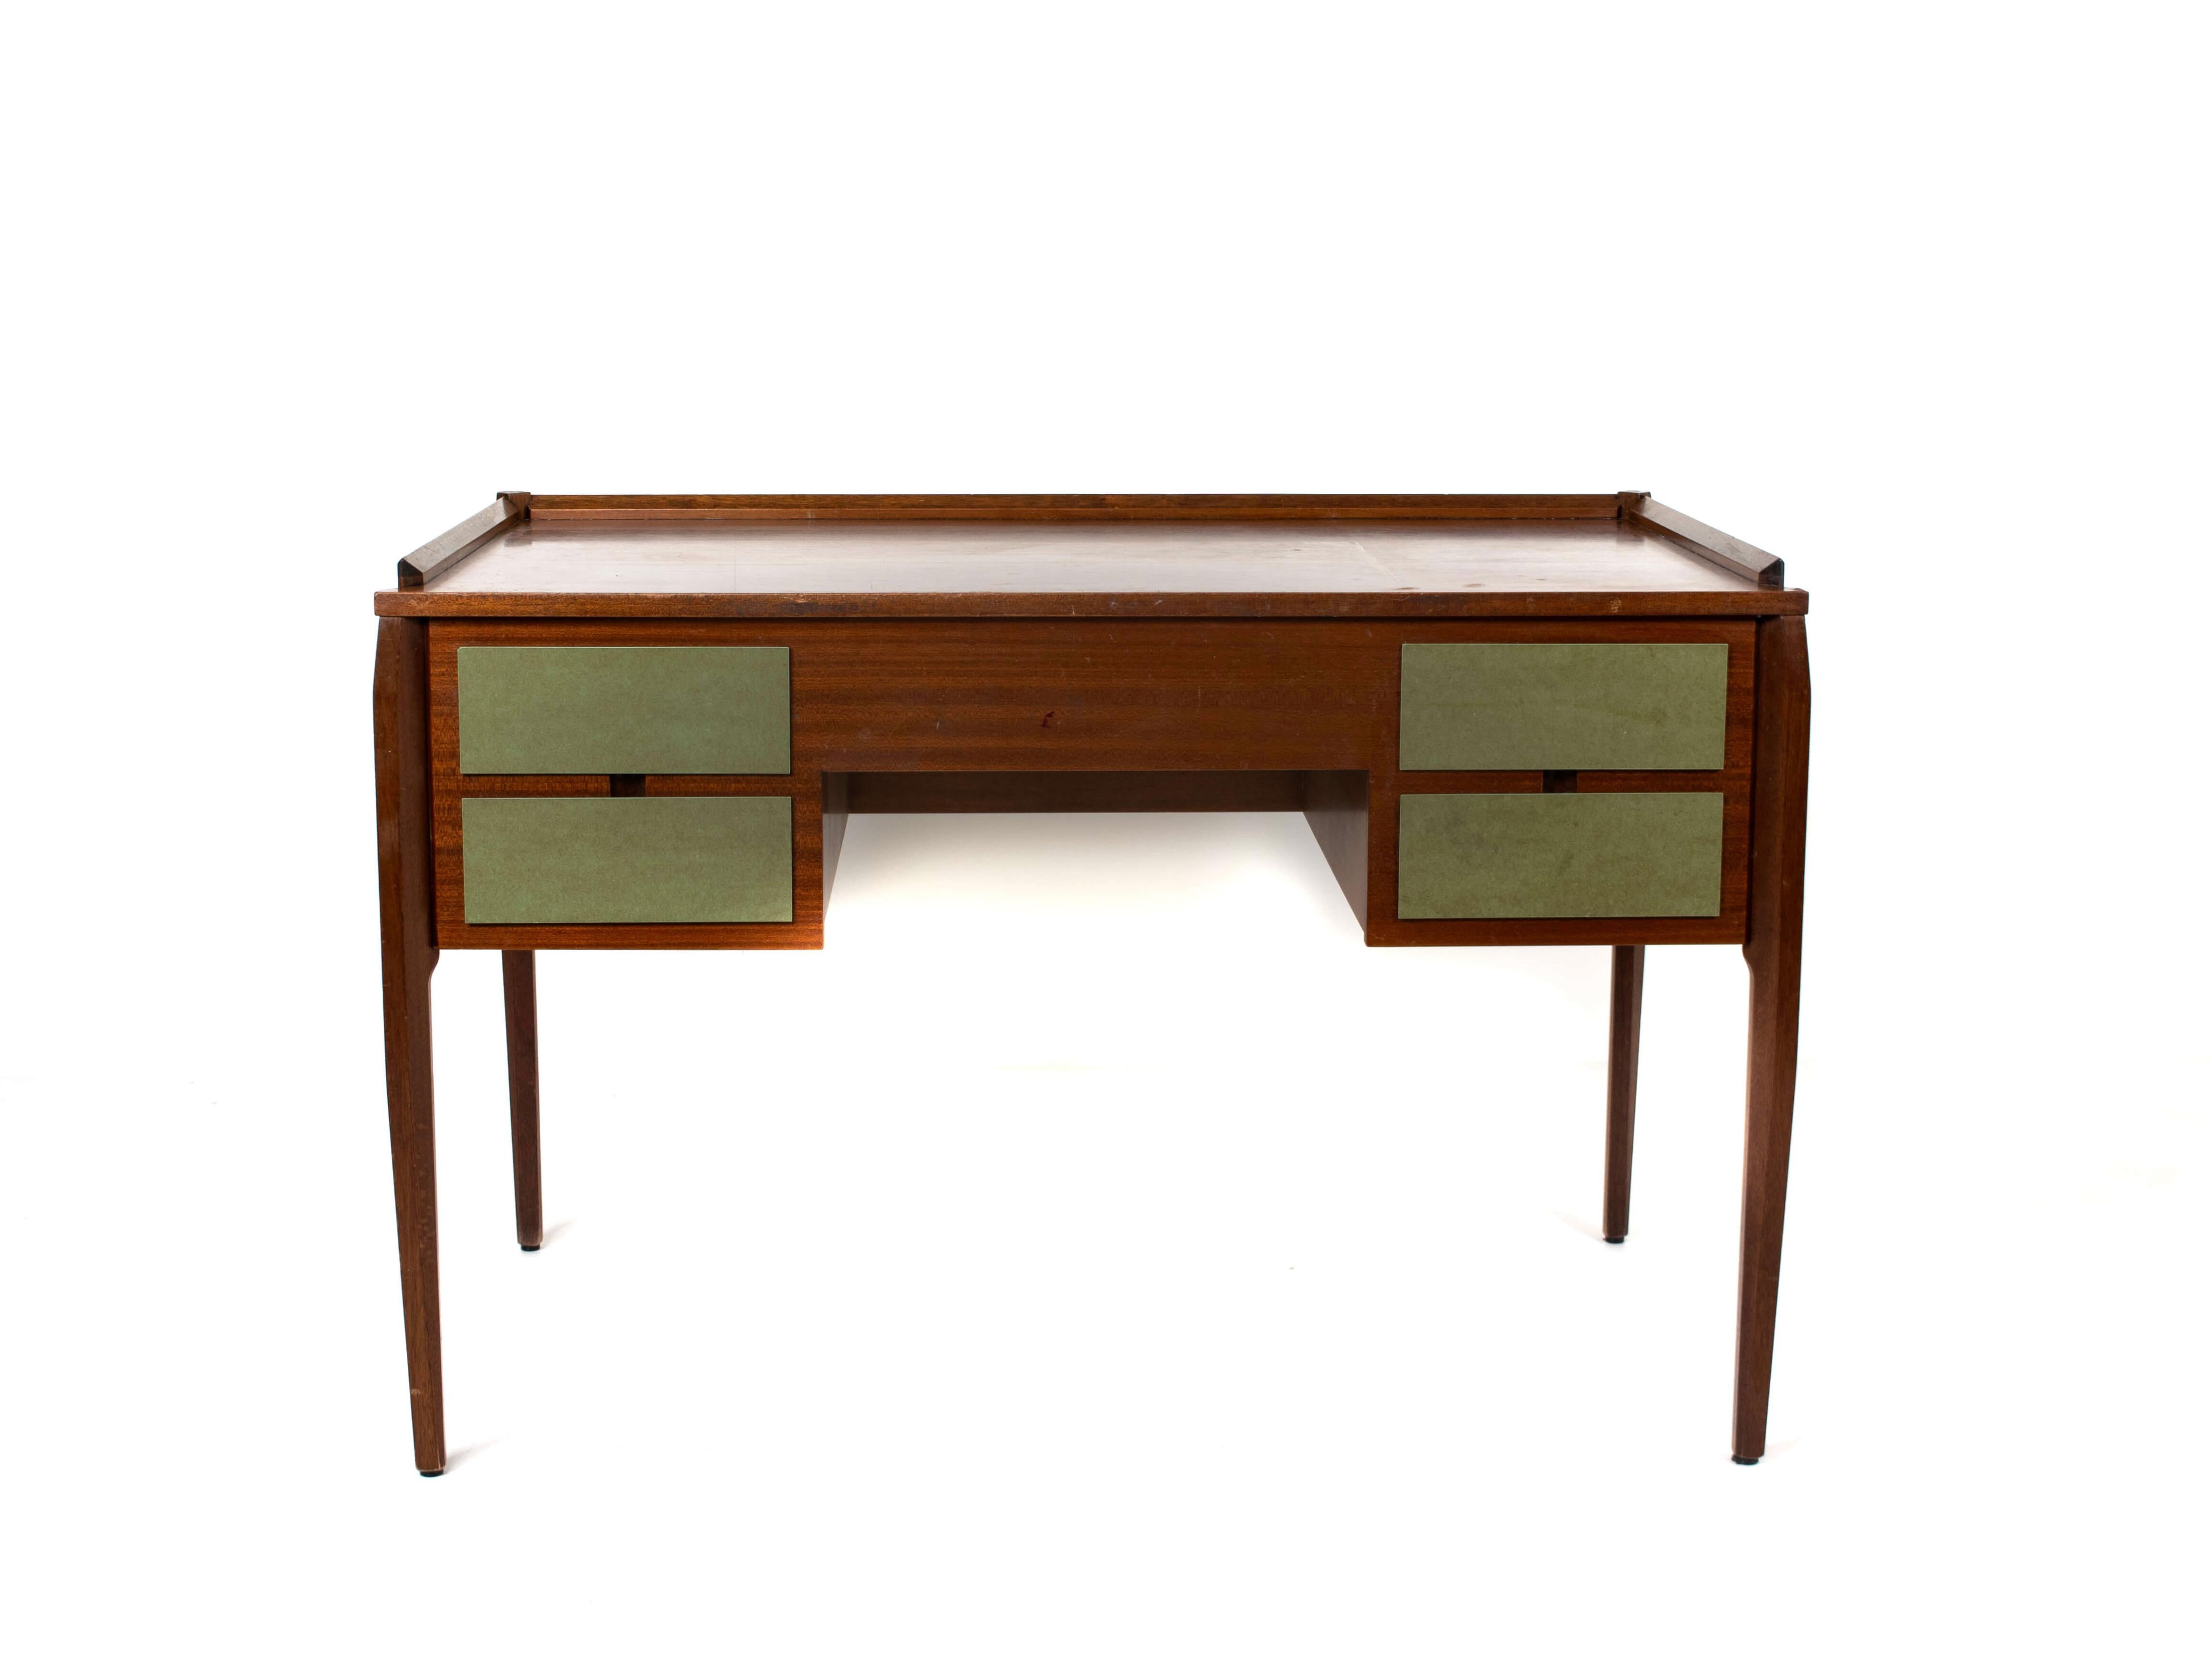 Italian Mid-Century Modern writing desk by Gio Ponti for Dassi from the 1960s. This desk is made out of mahogany veneer with the front drawers laminated in green. The desk has a minimal and functional design. This desk is very practical and has the